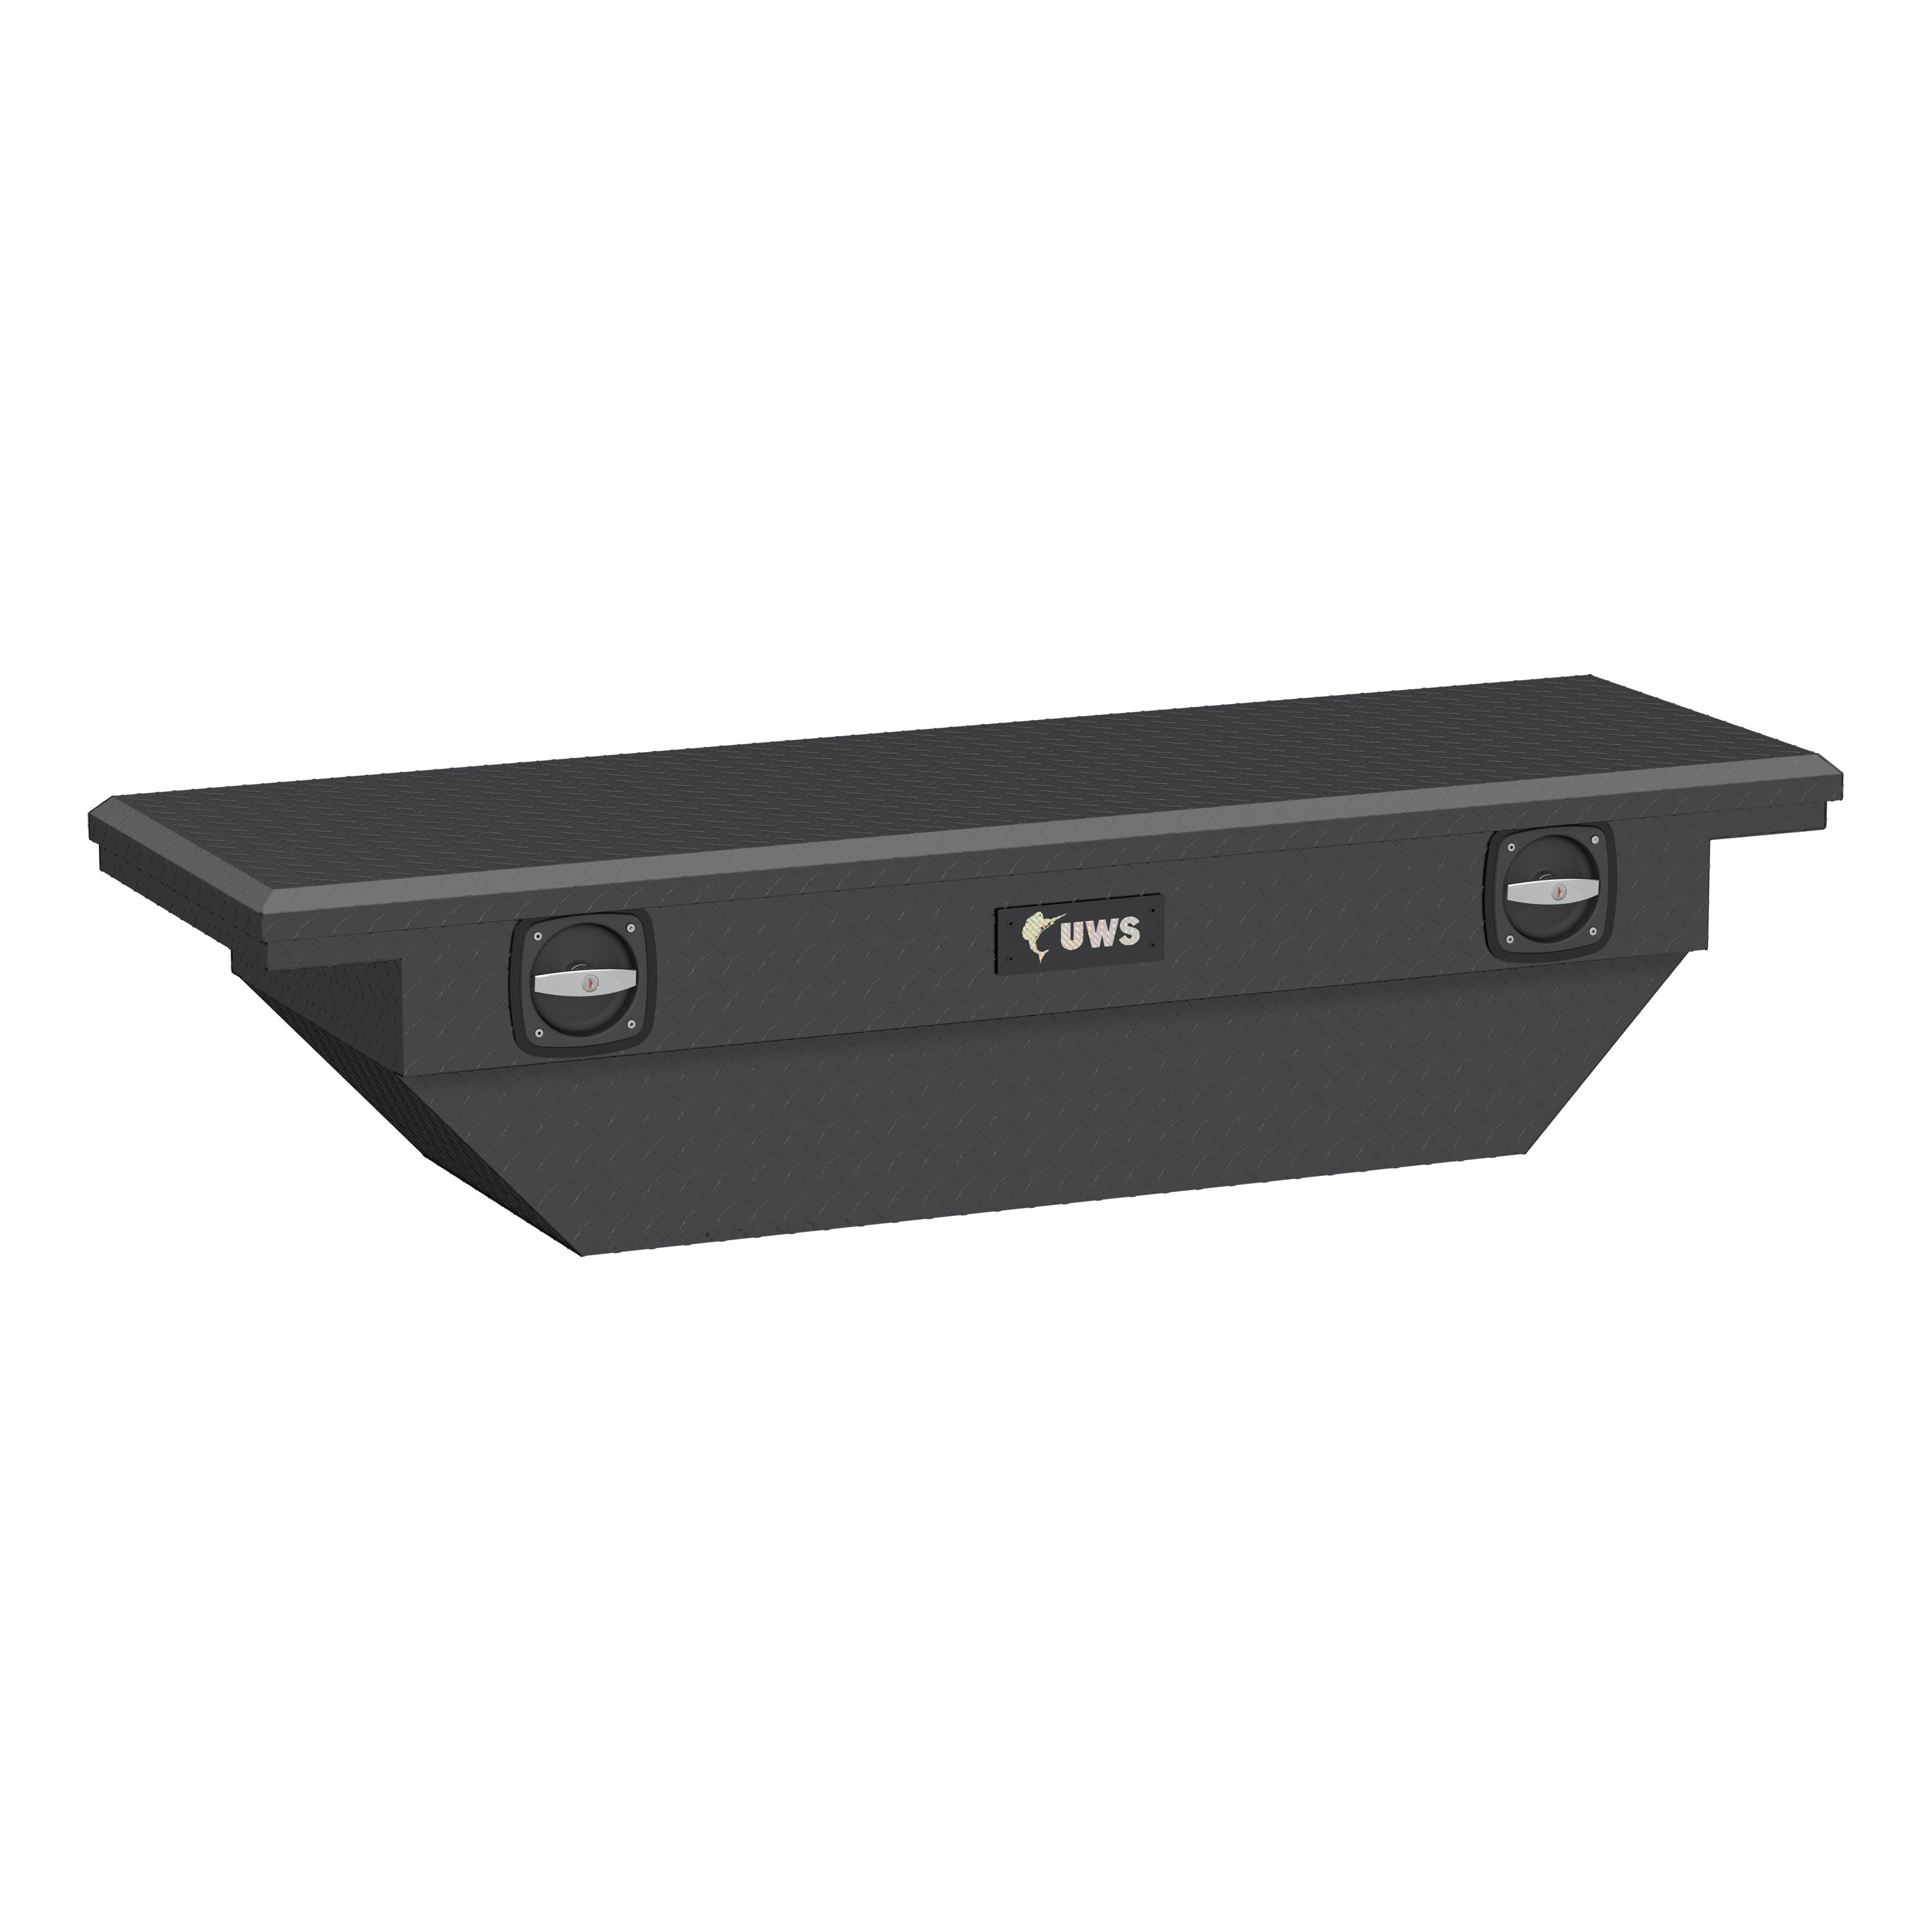 UWS SL-63-A-LP-MB Matte Black 63 inch Secure Lock Angled Tool Box, Low Profile (LTL Shipping Only)